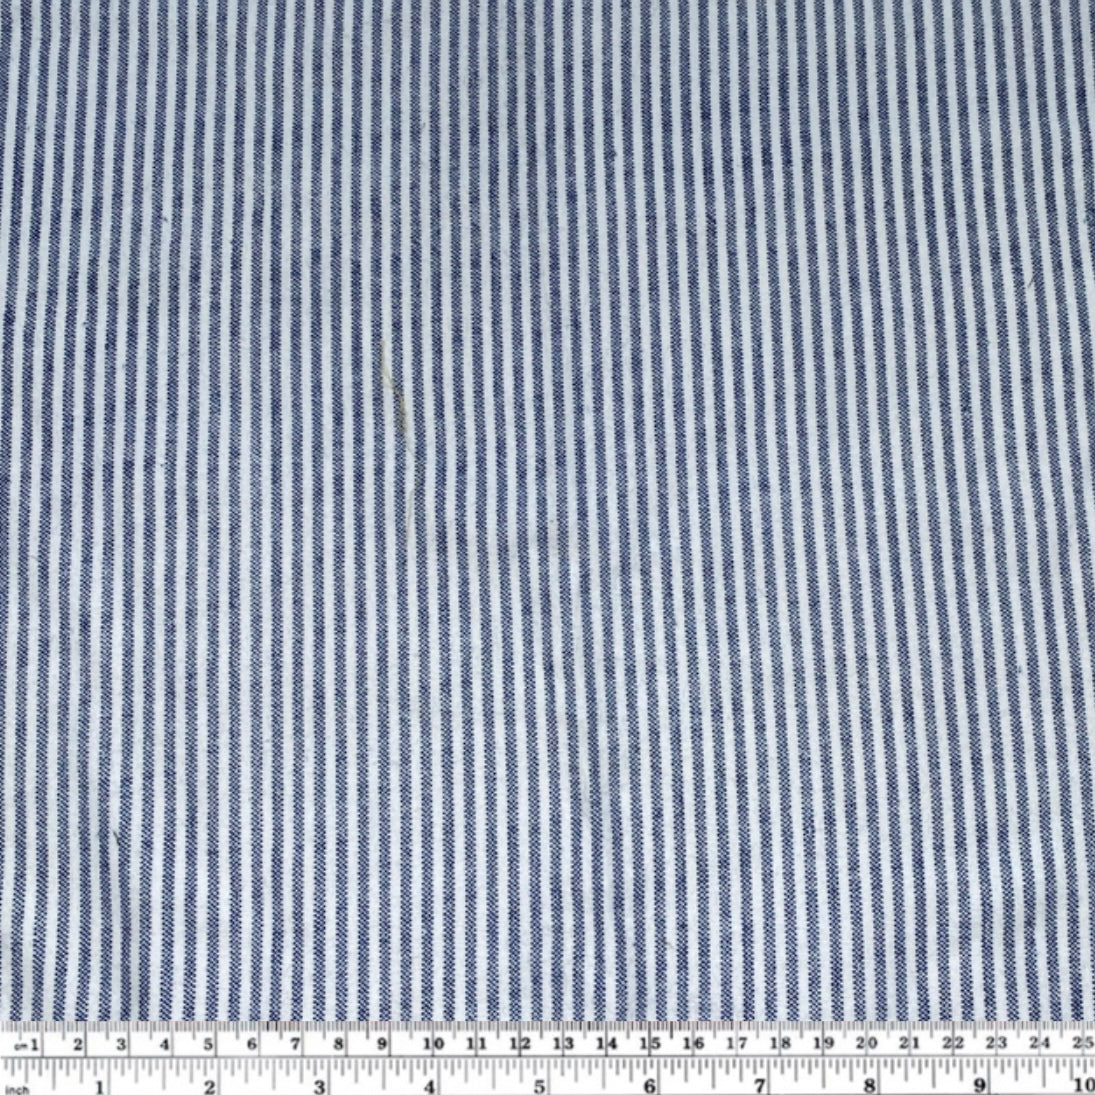 Printed Cotton Flannel - Striped - White/Navy